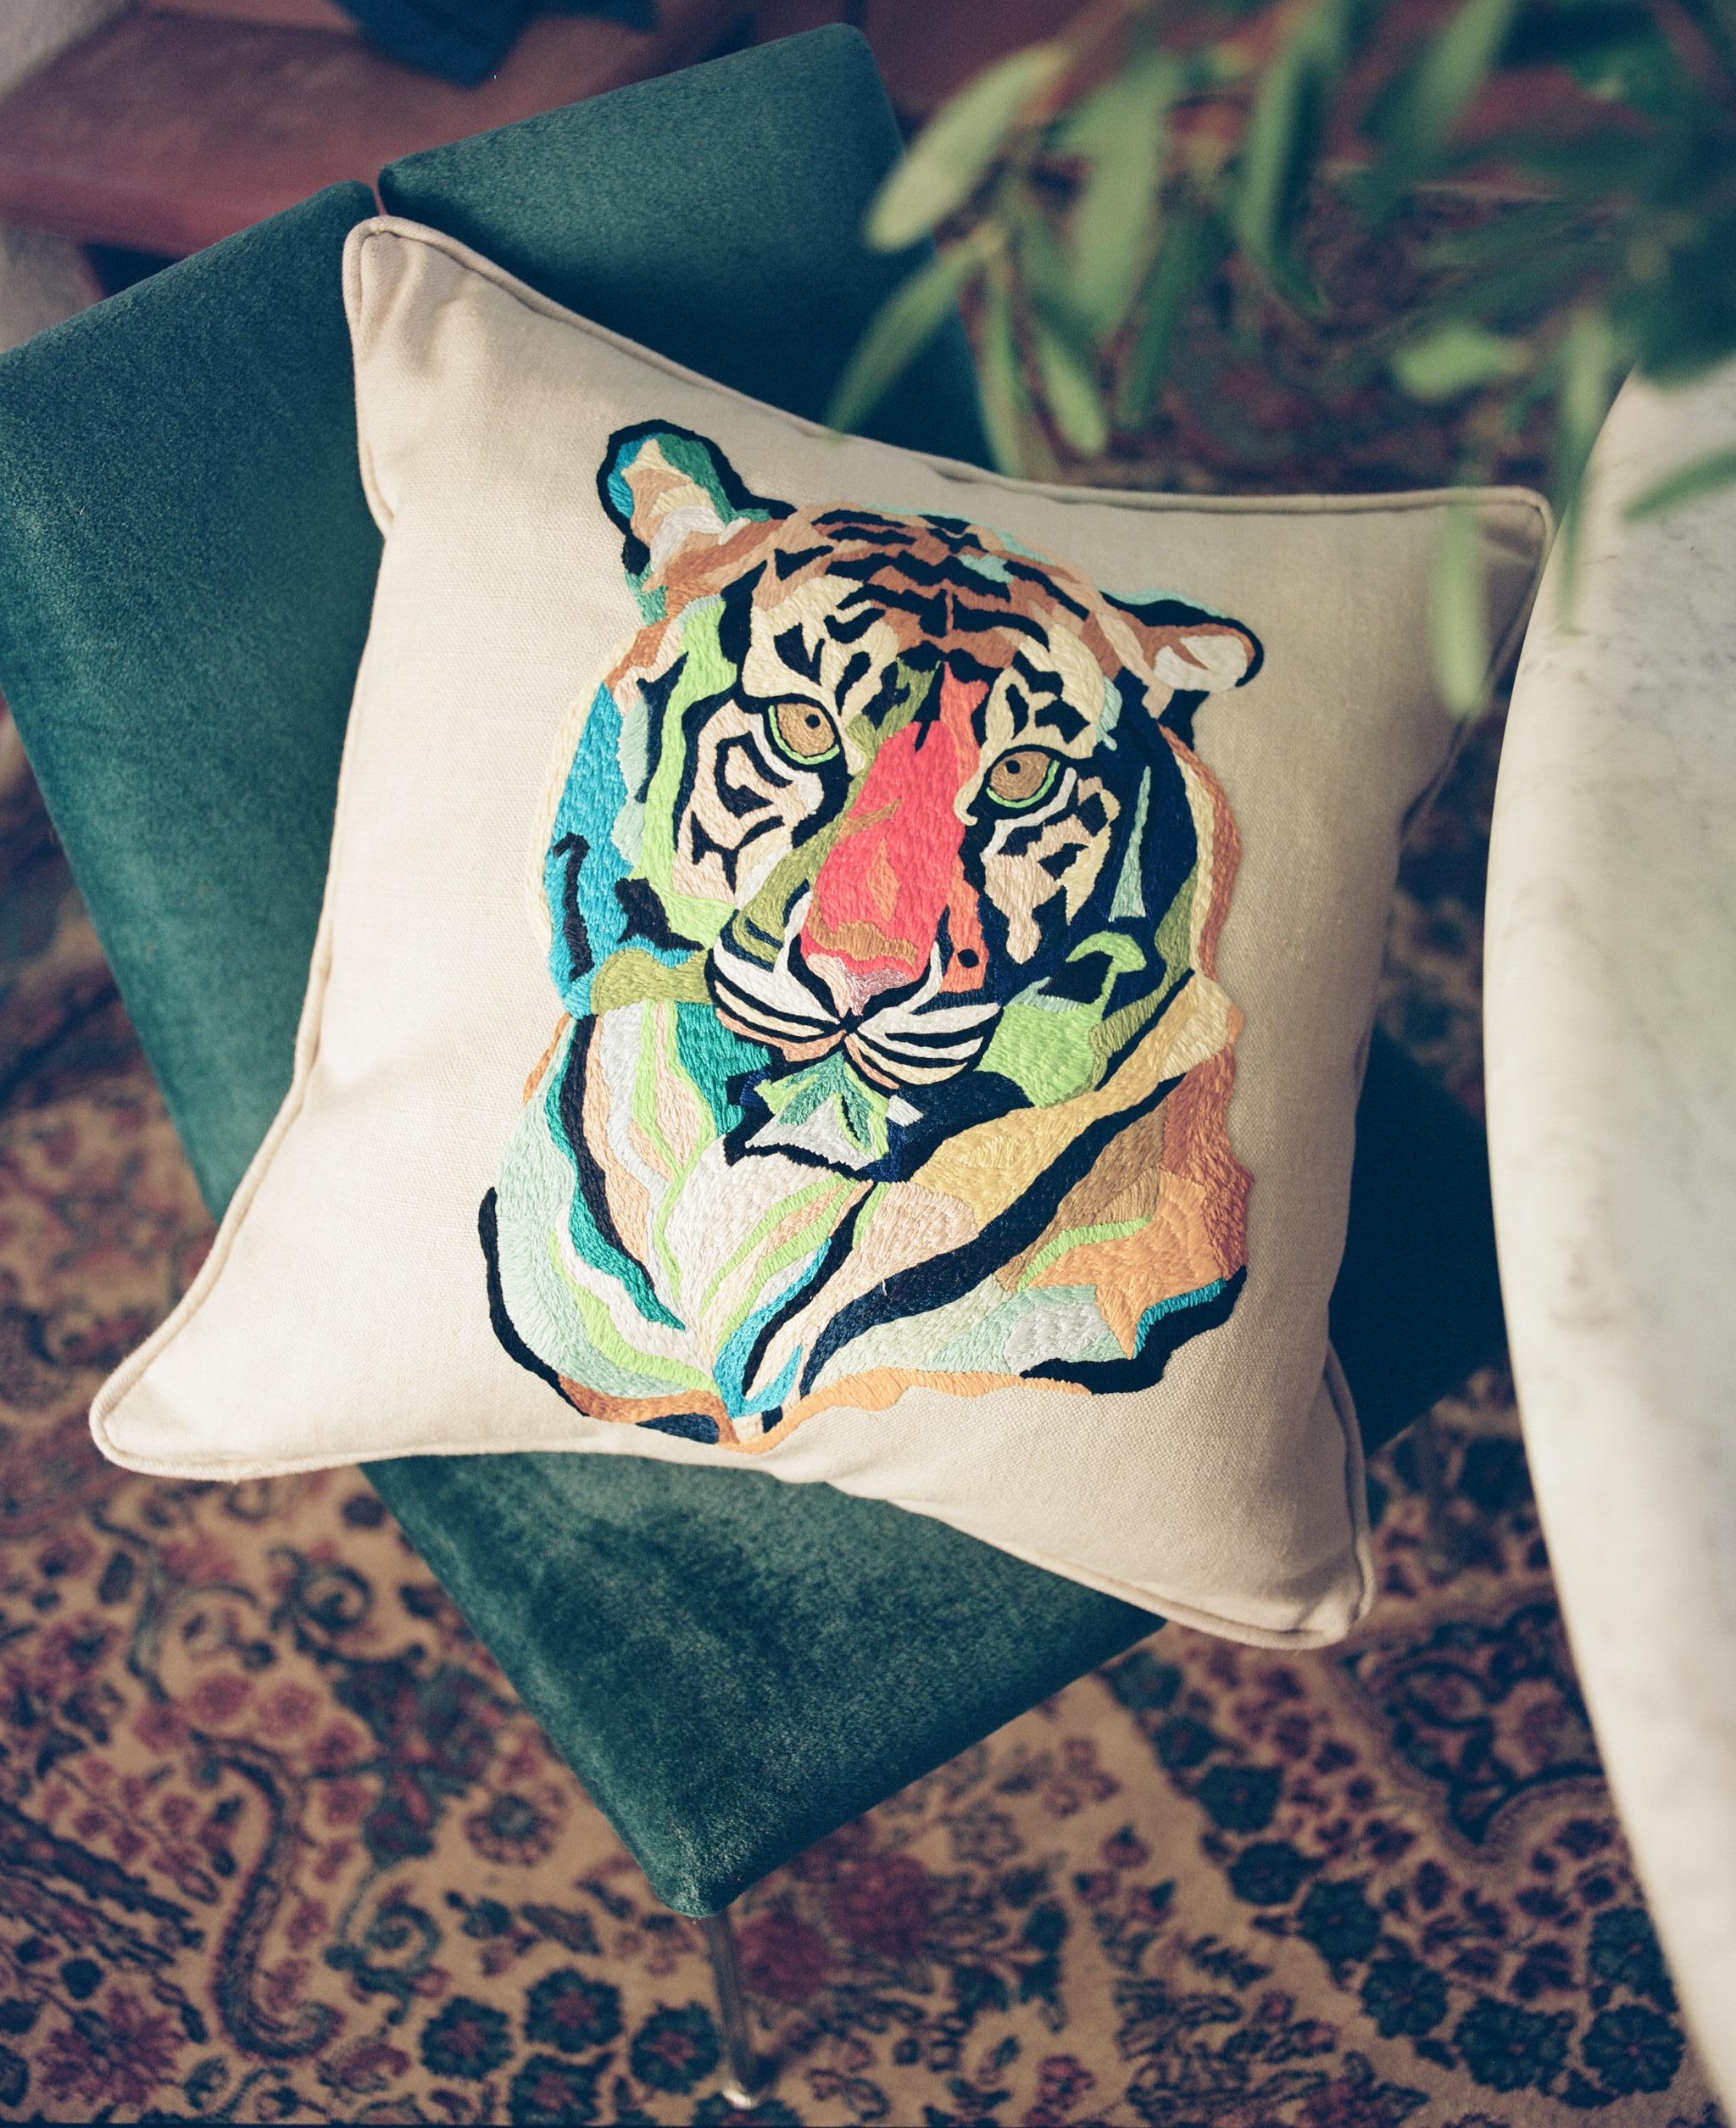 This decorative heavy cotton cushion is hand embroidered using silk and metallic vibrant threads. The portrait of a tiger and the unique use of neon accents have quickly become signature elements of this pillow series. The embroidery technique shows